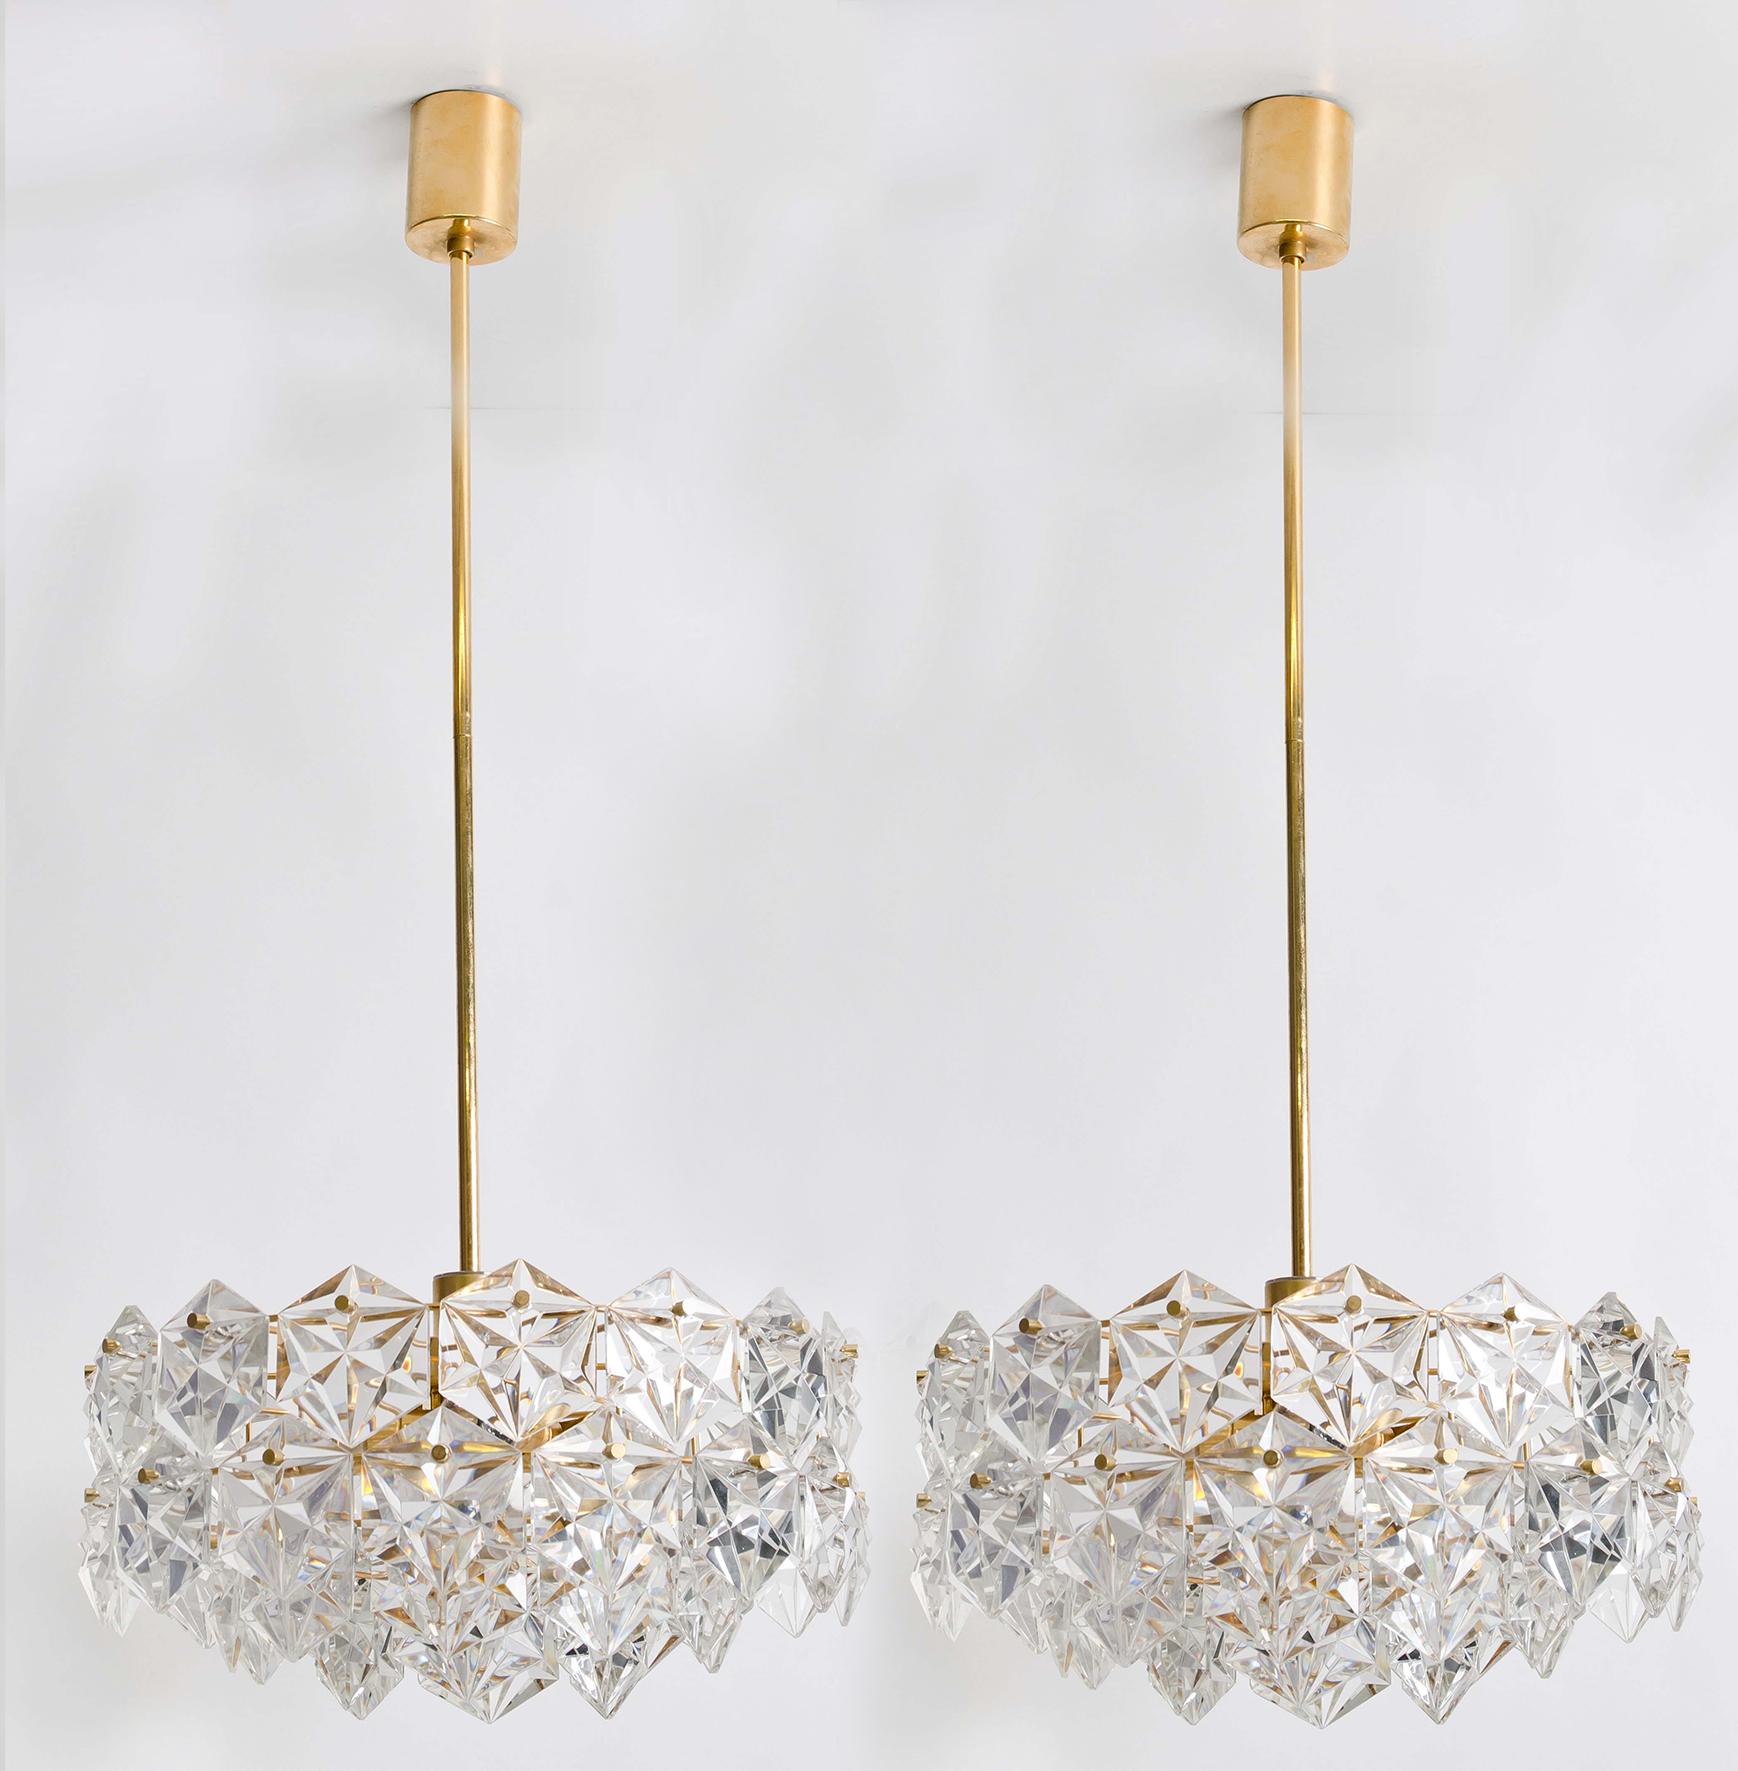 This modernist design chandelier was designed by the Kinkeldey design team during the 1970s, and manufactured in Germany. The crystals are meticulously cut in such a way that the radiate the light of the bulbs in different directions. All metal